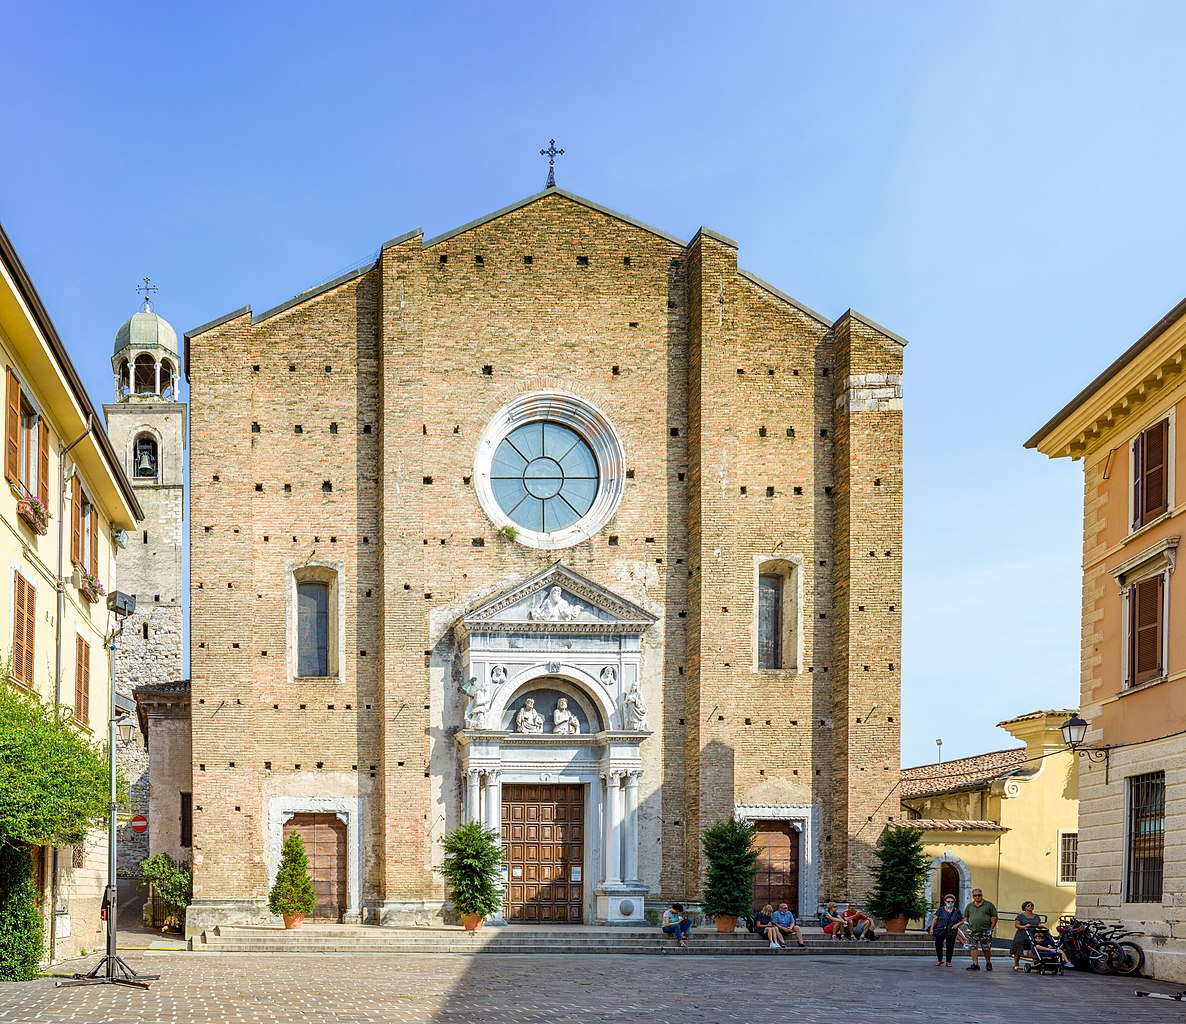 The Cathedral of Salò